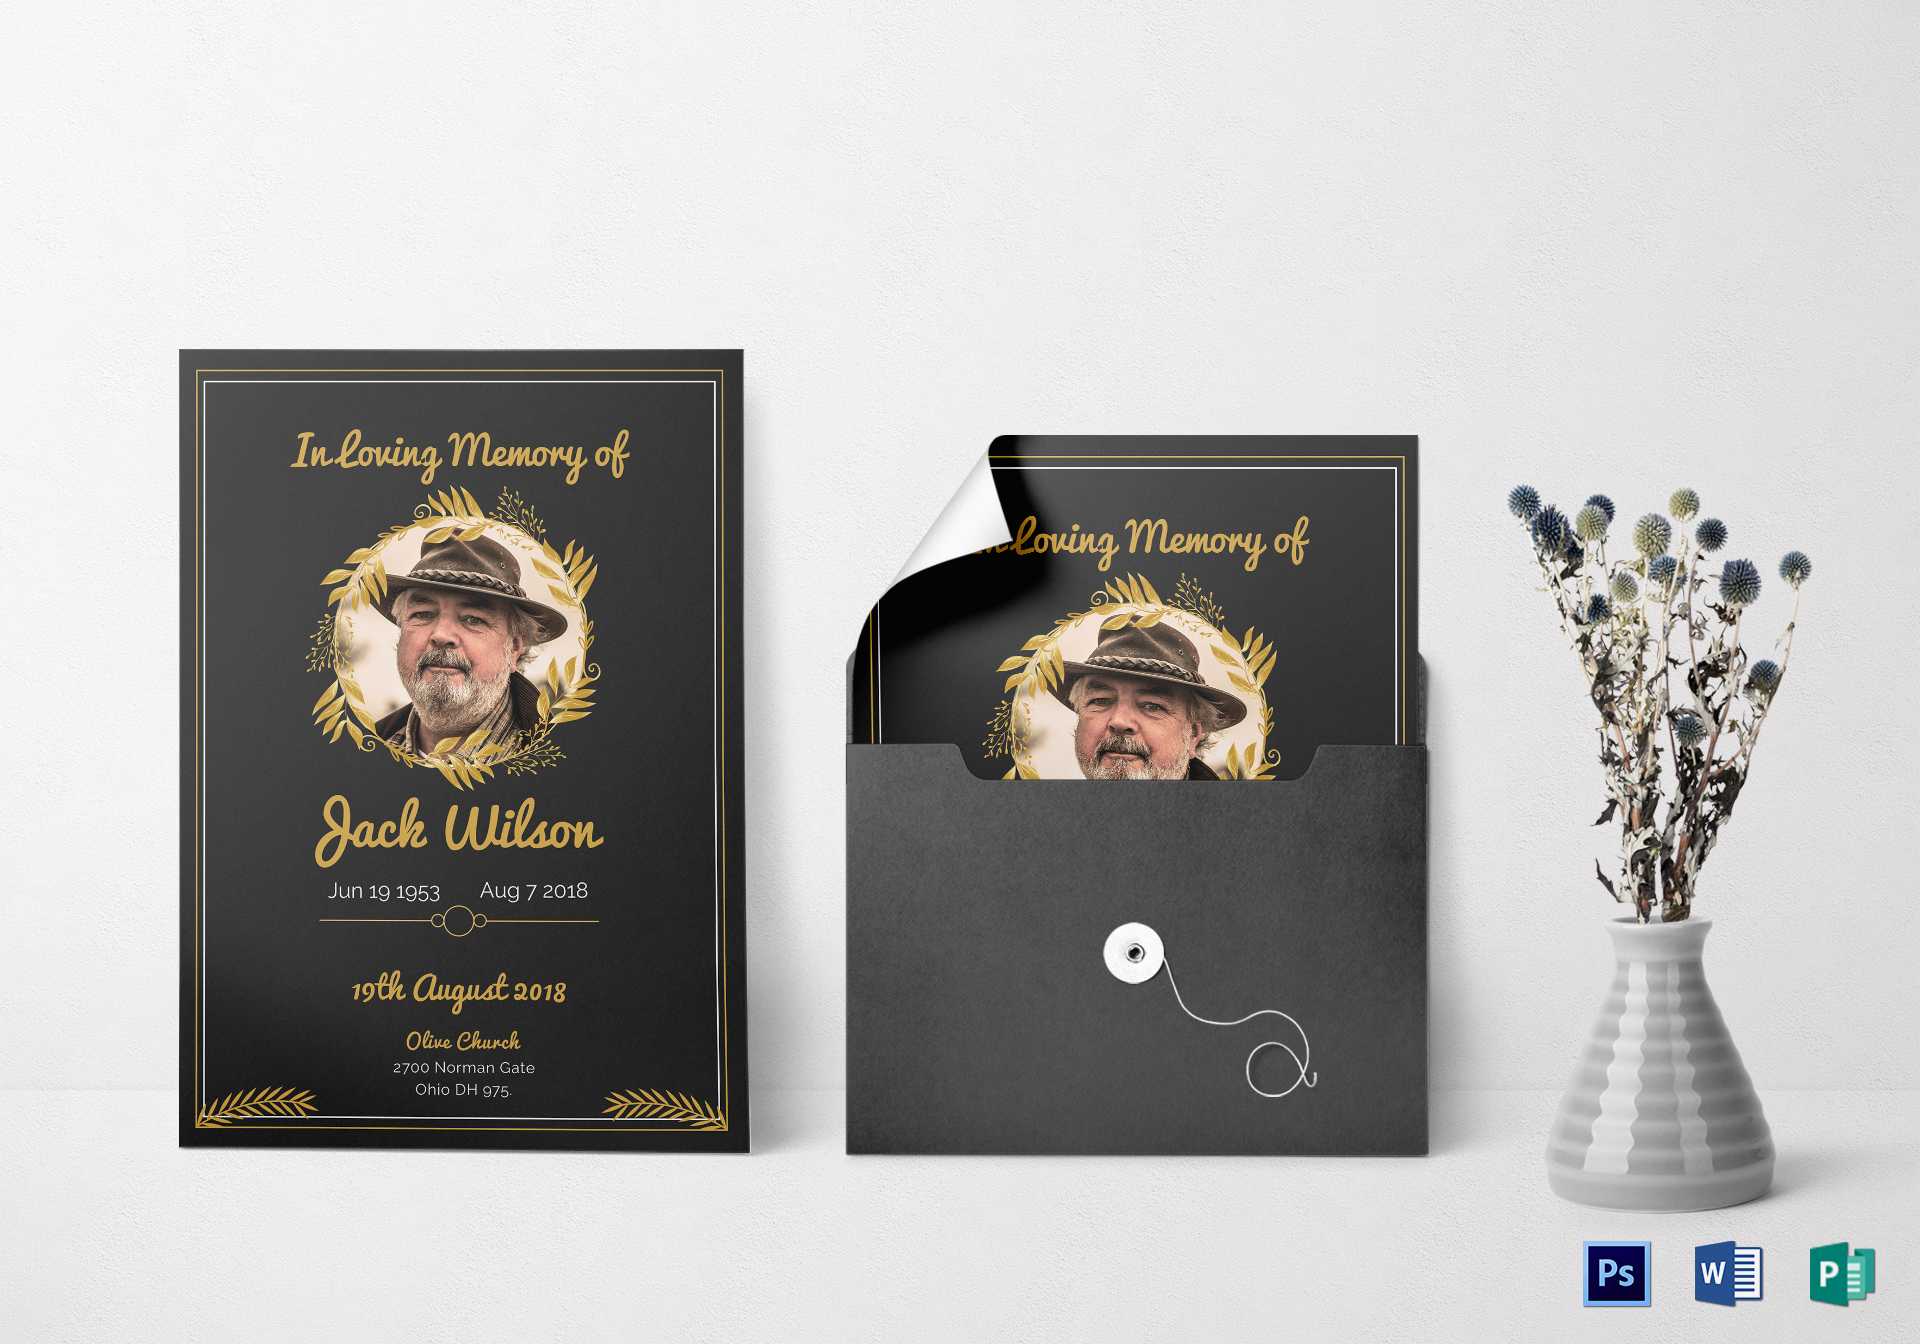 Funeral Invitation Card Template Throughout Funeral Invitation Card Template